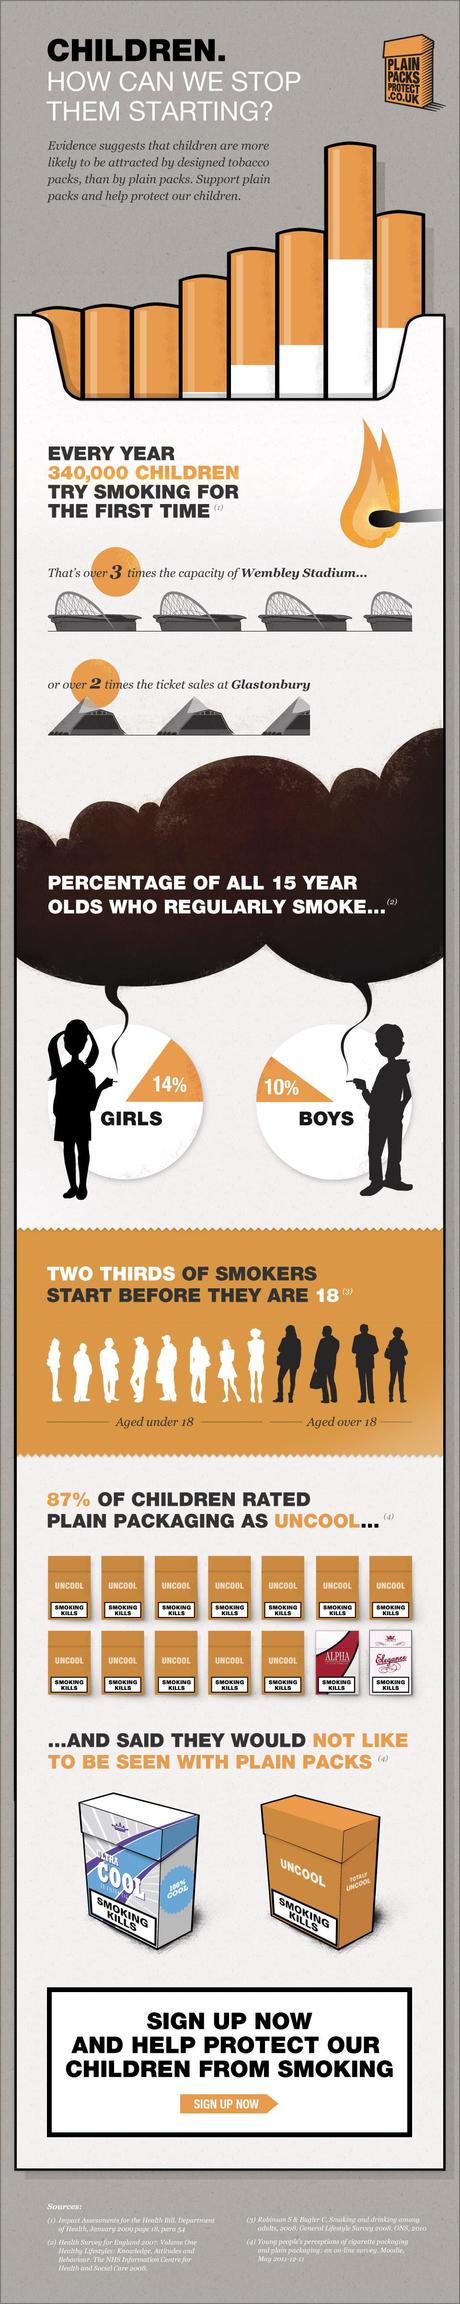 Smoking facts for kids